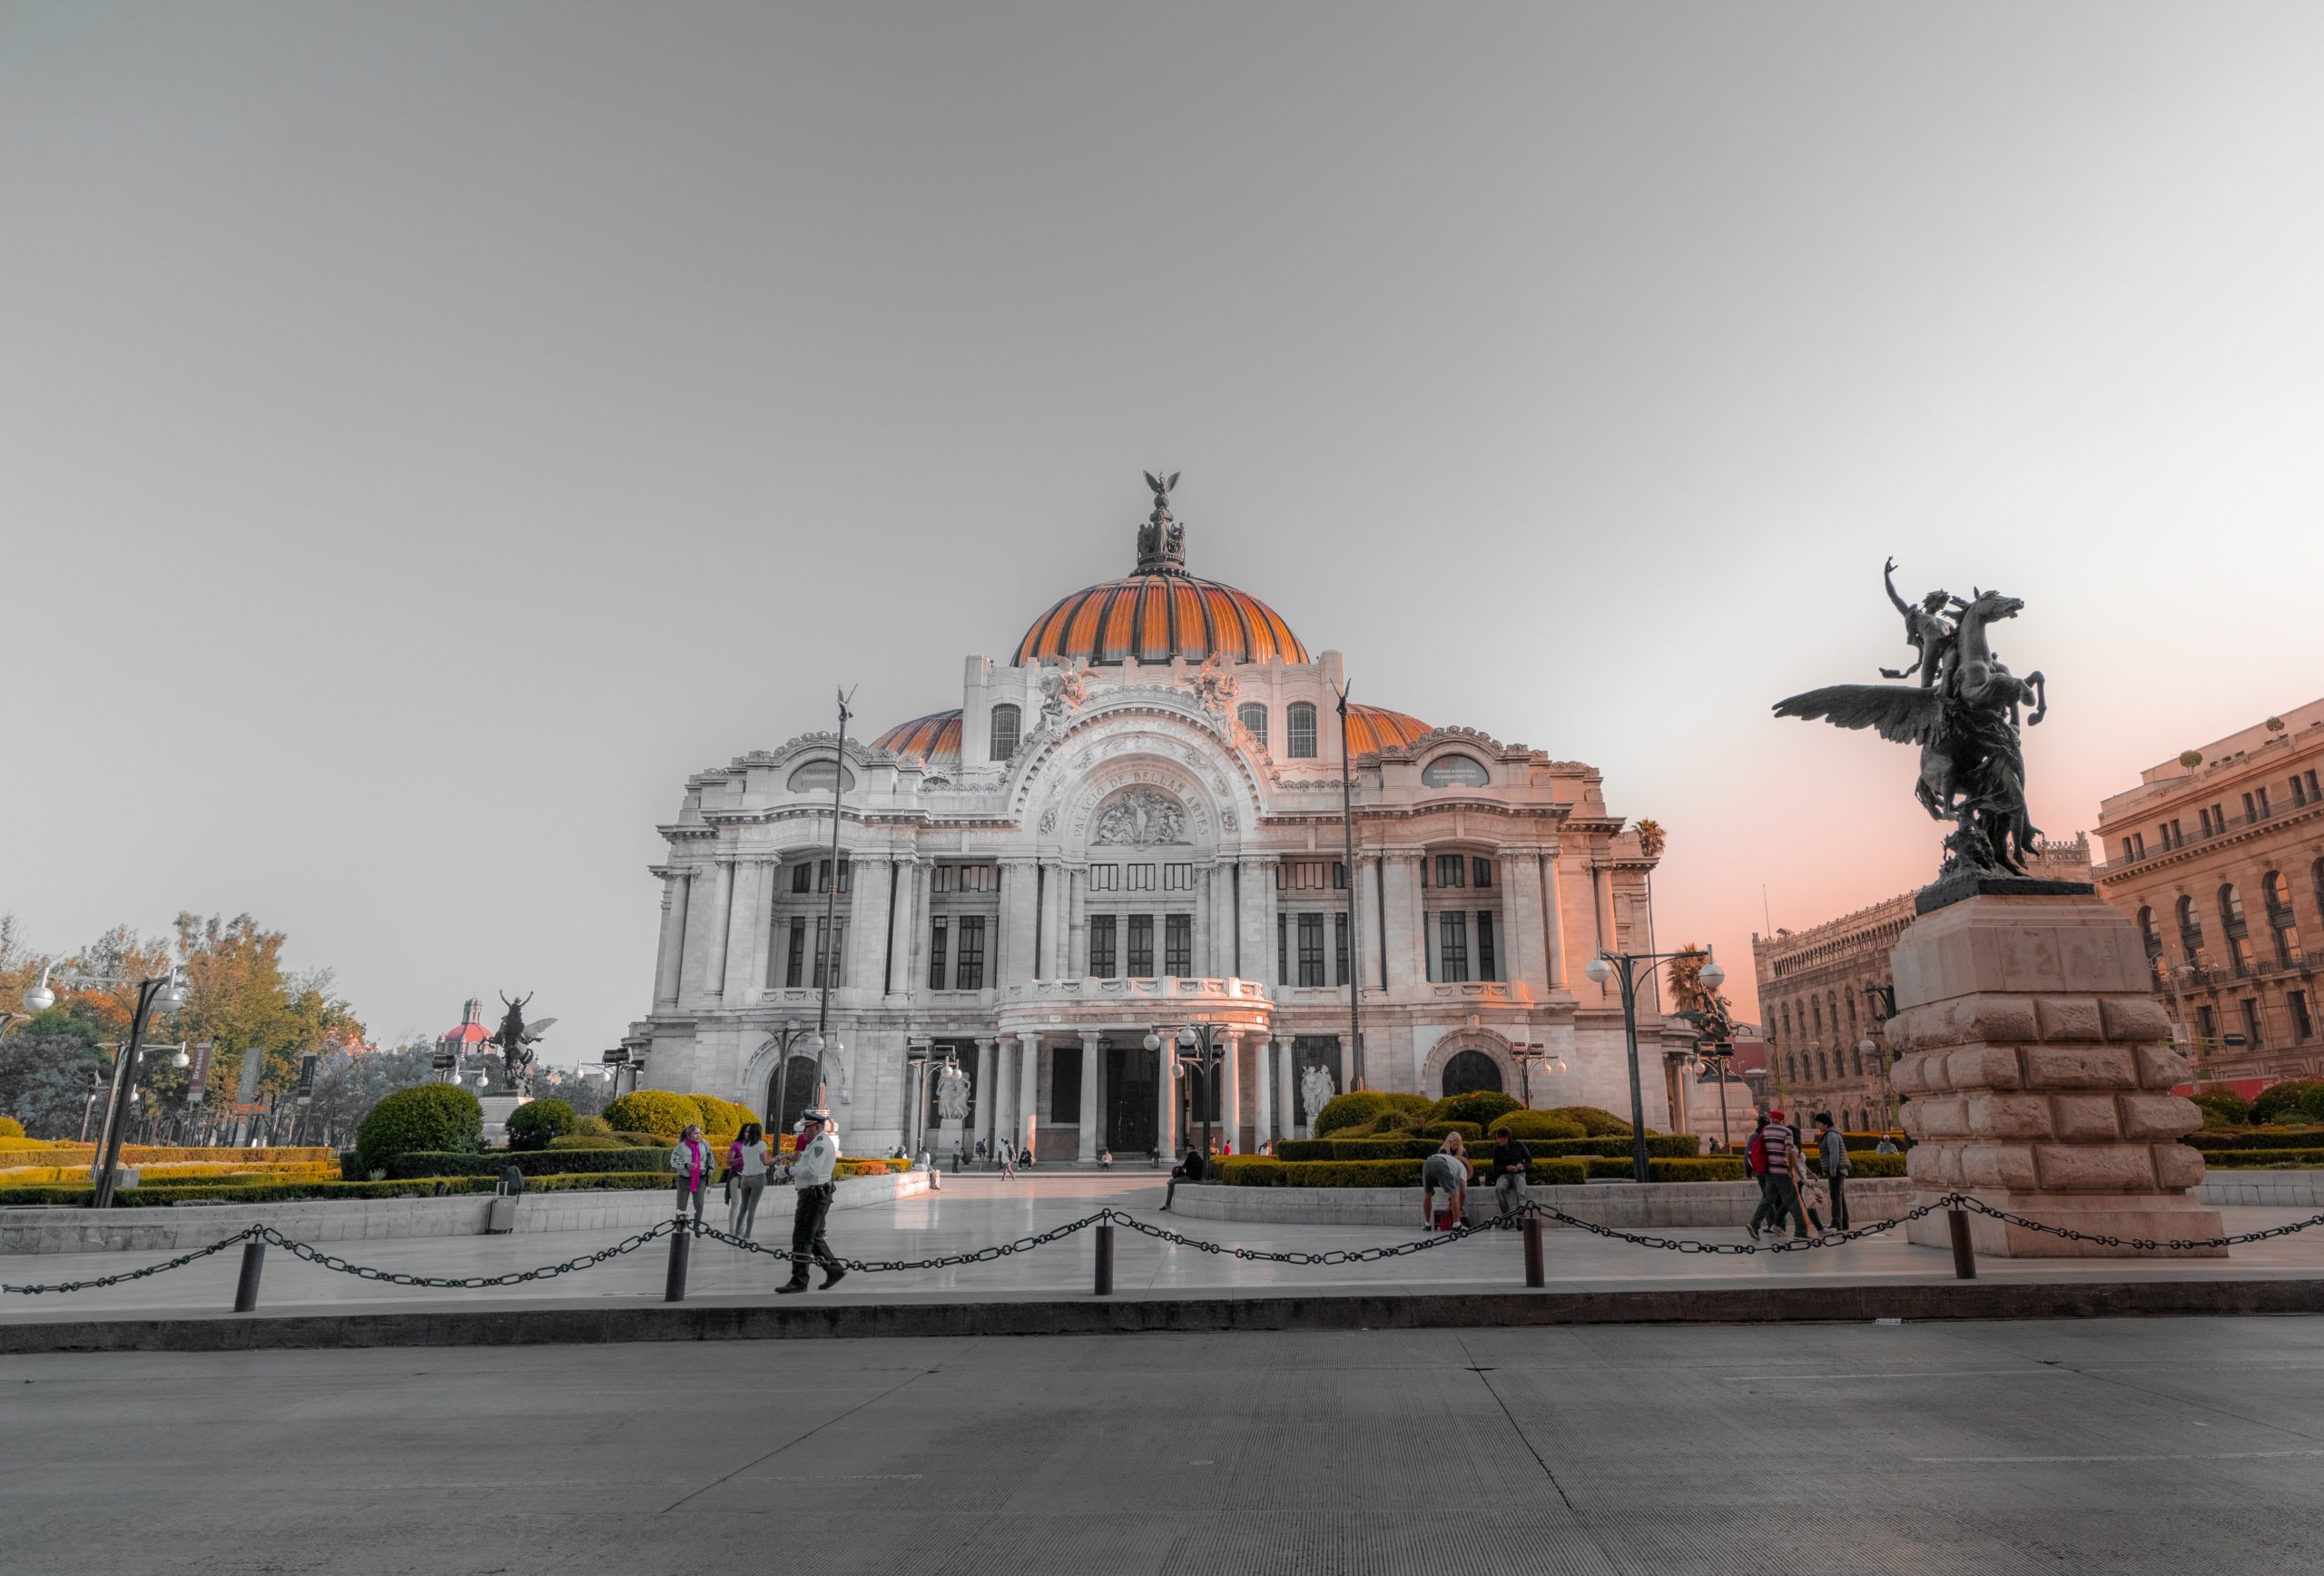 The historic center of Mexico city, Mexico where multiple movies have been filmed, including in the James Bond film locations.